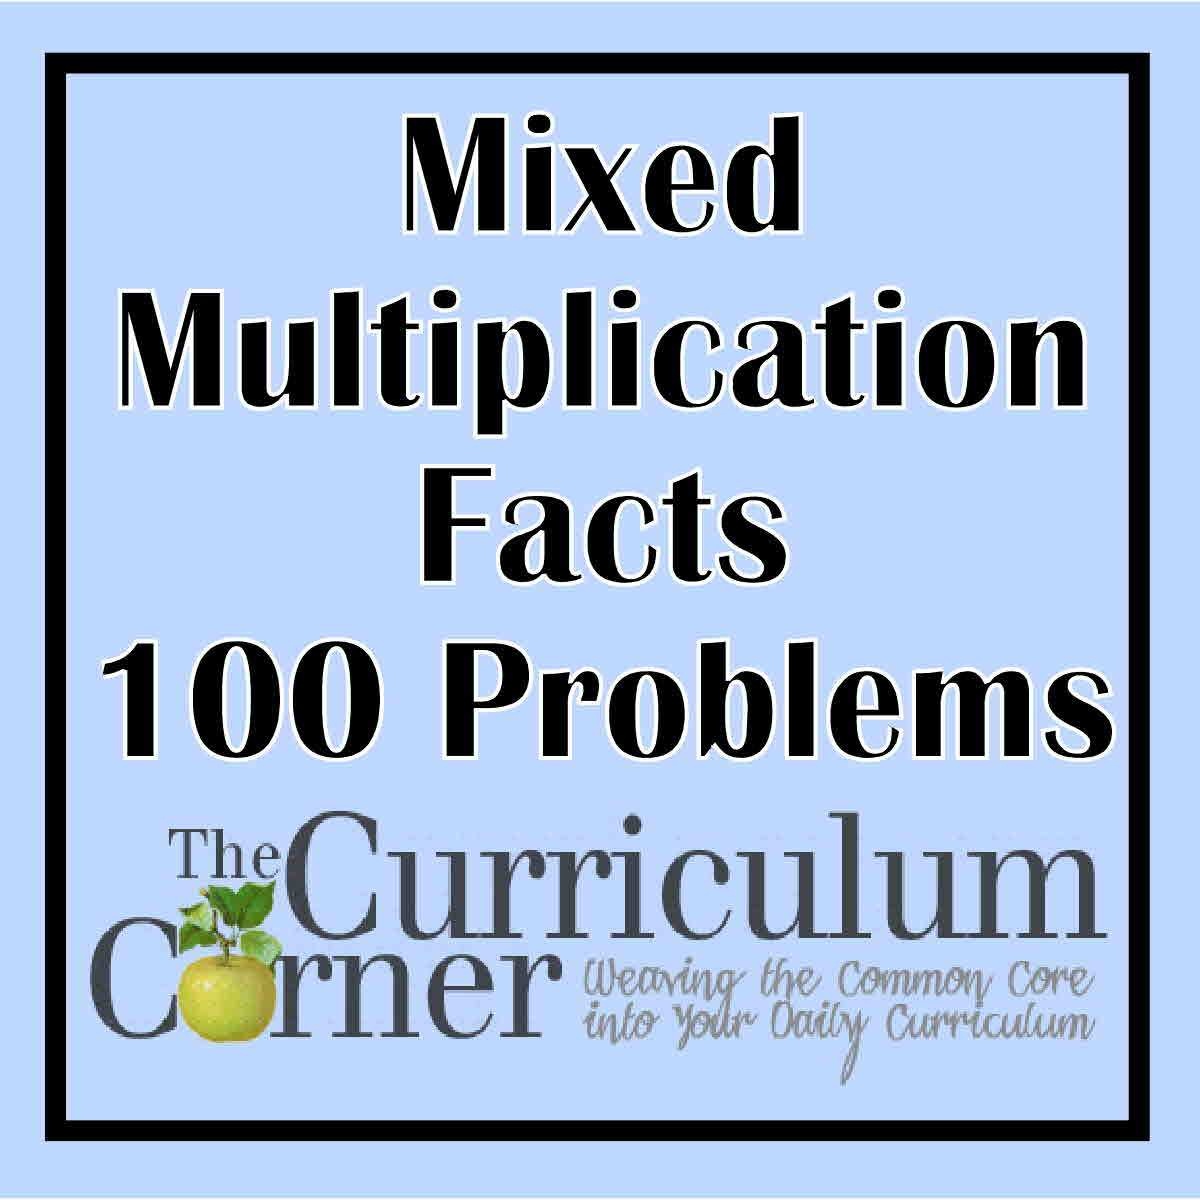 Mixed Multiplication Facts 100 Problems - The Curriculum Corner 123 - Free Printable Multiplication Worksheets 100 Problems